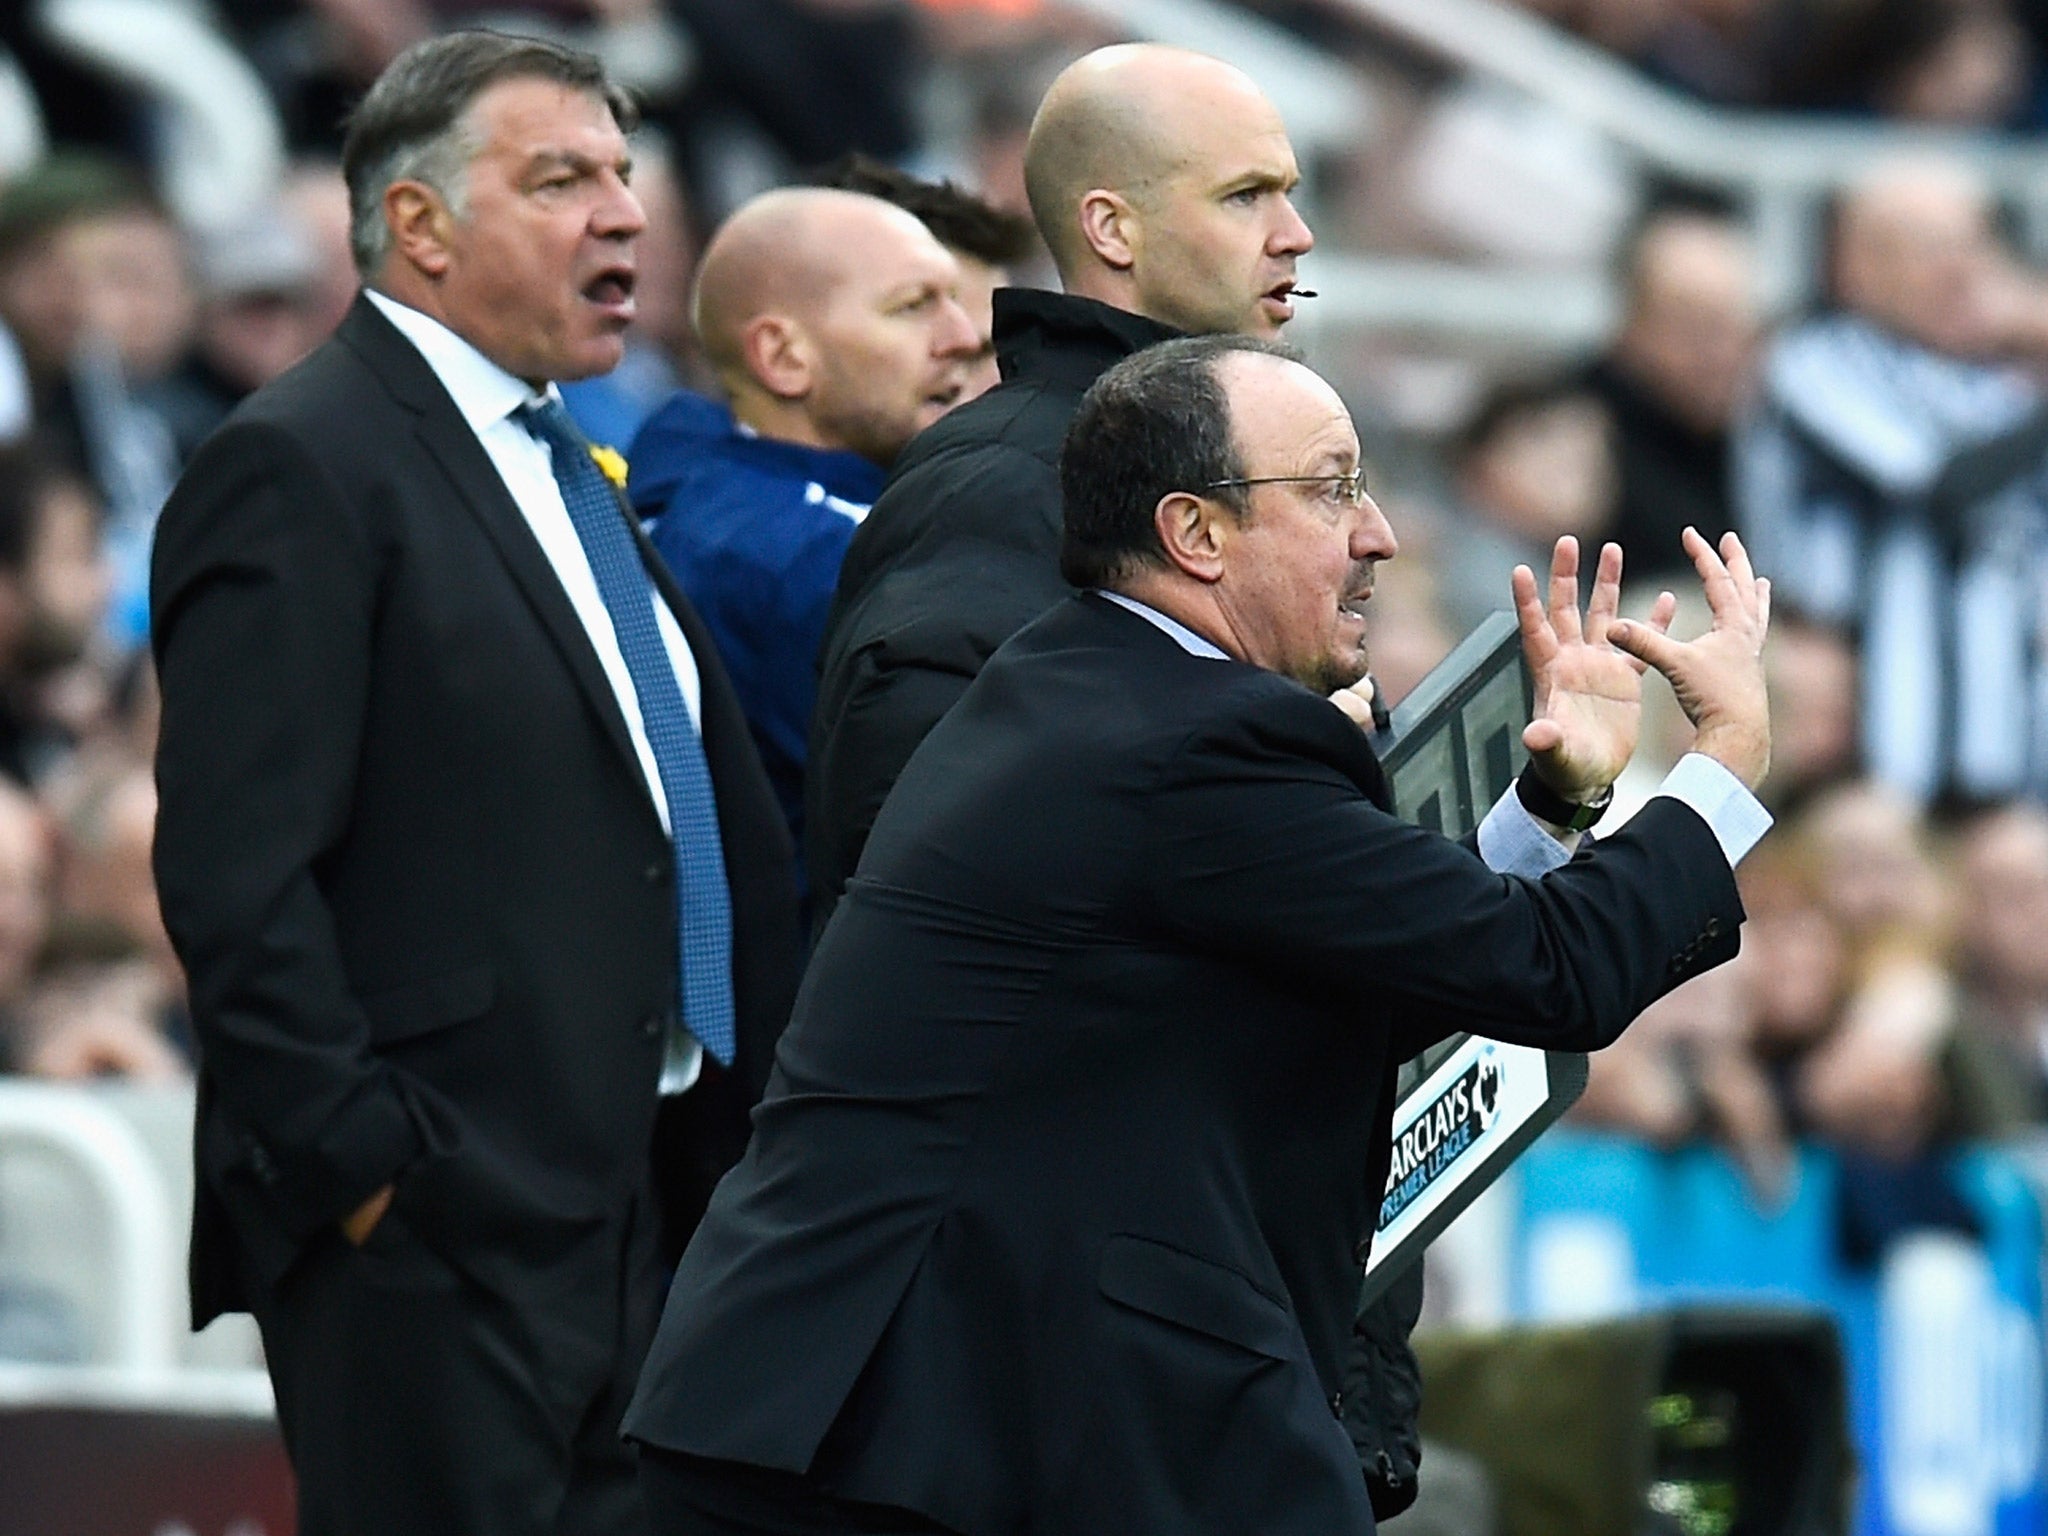 Sam Allardyce and Rafa Benitez are bidding to keep Sunderland and Newcastle respectively in the Premier League